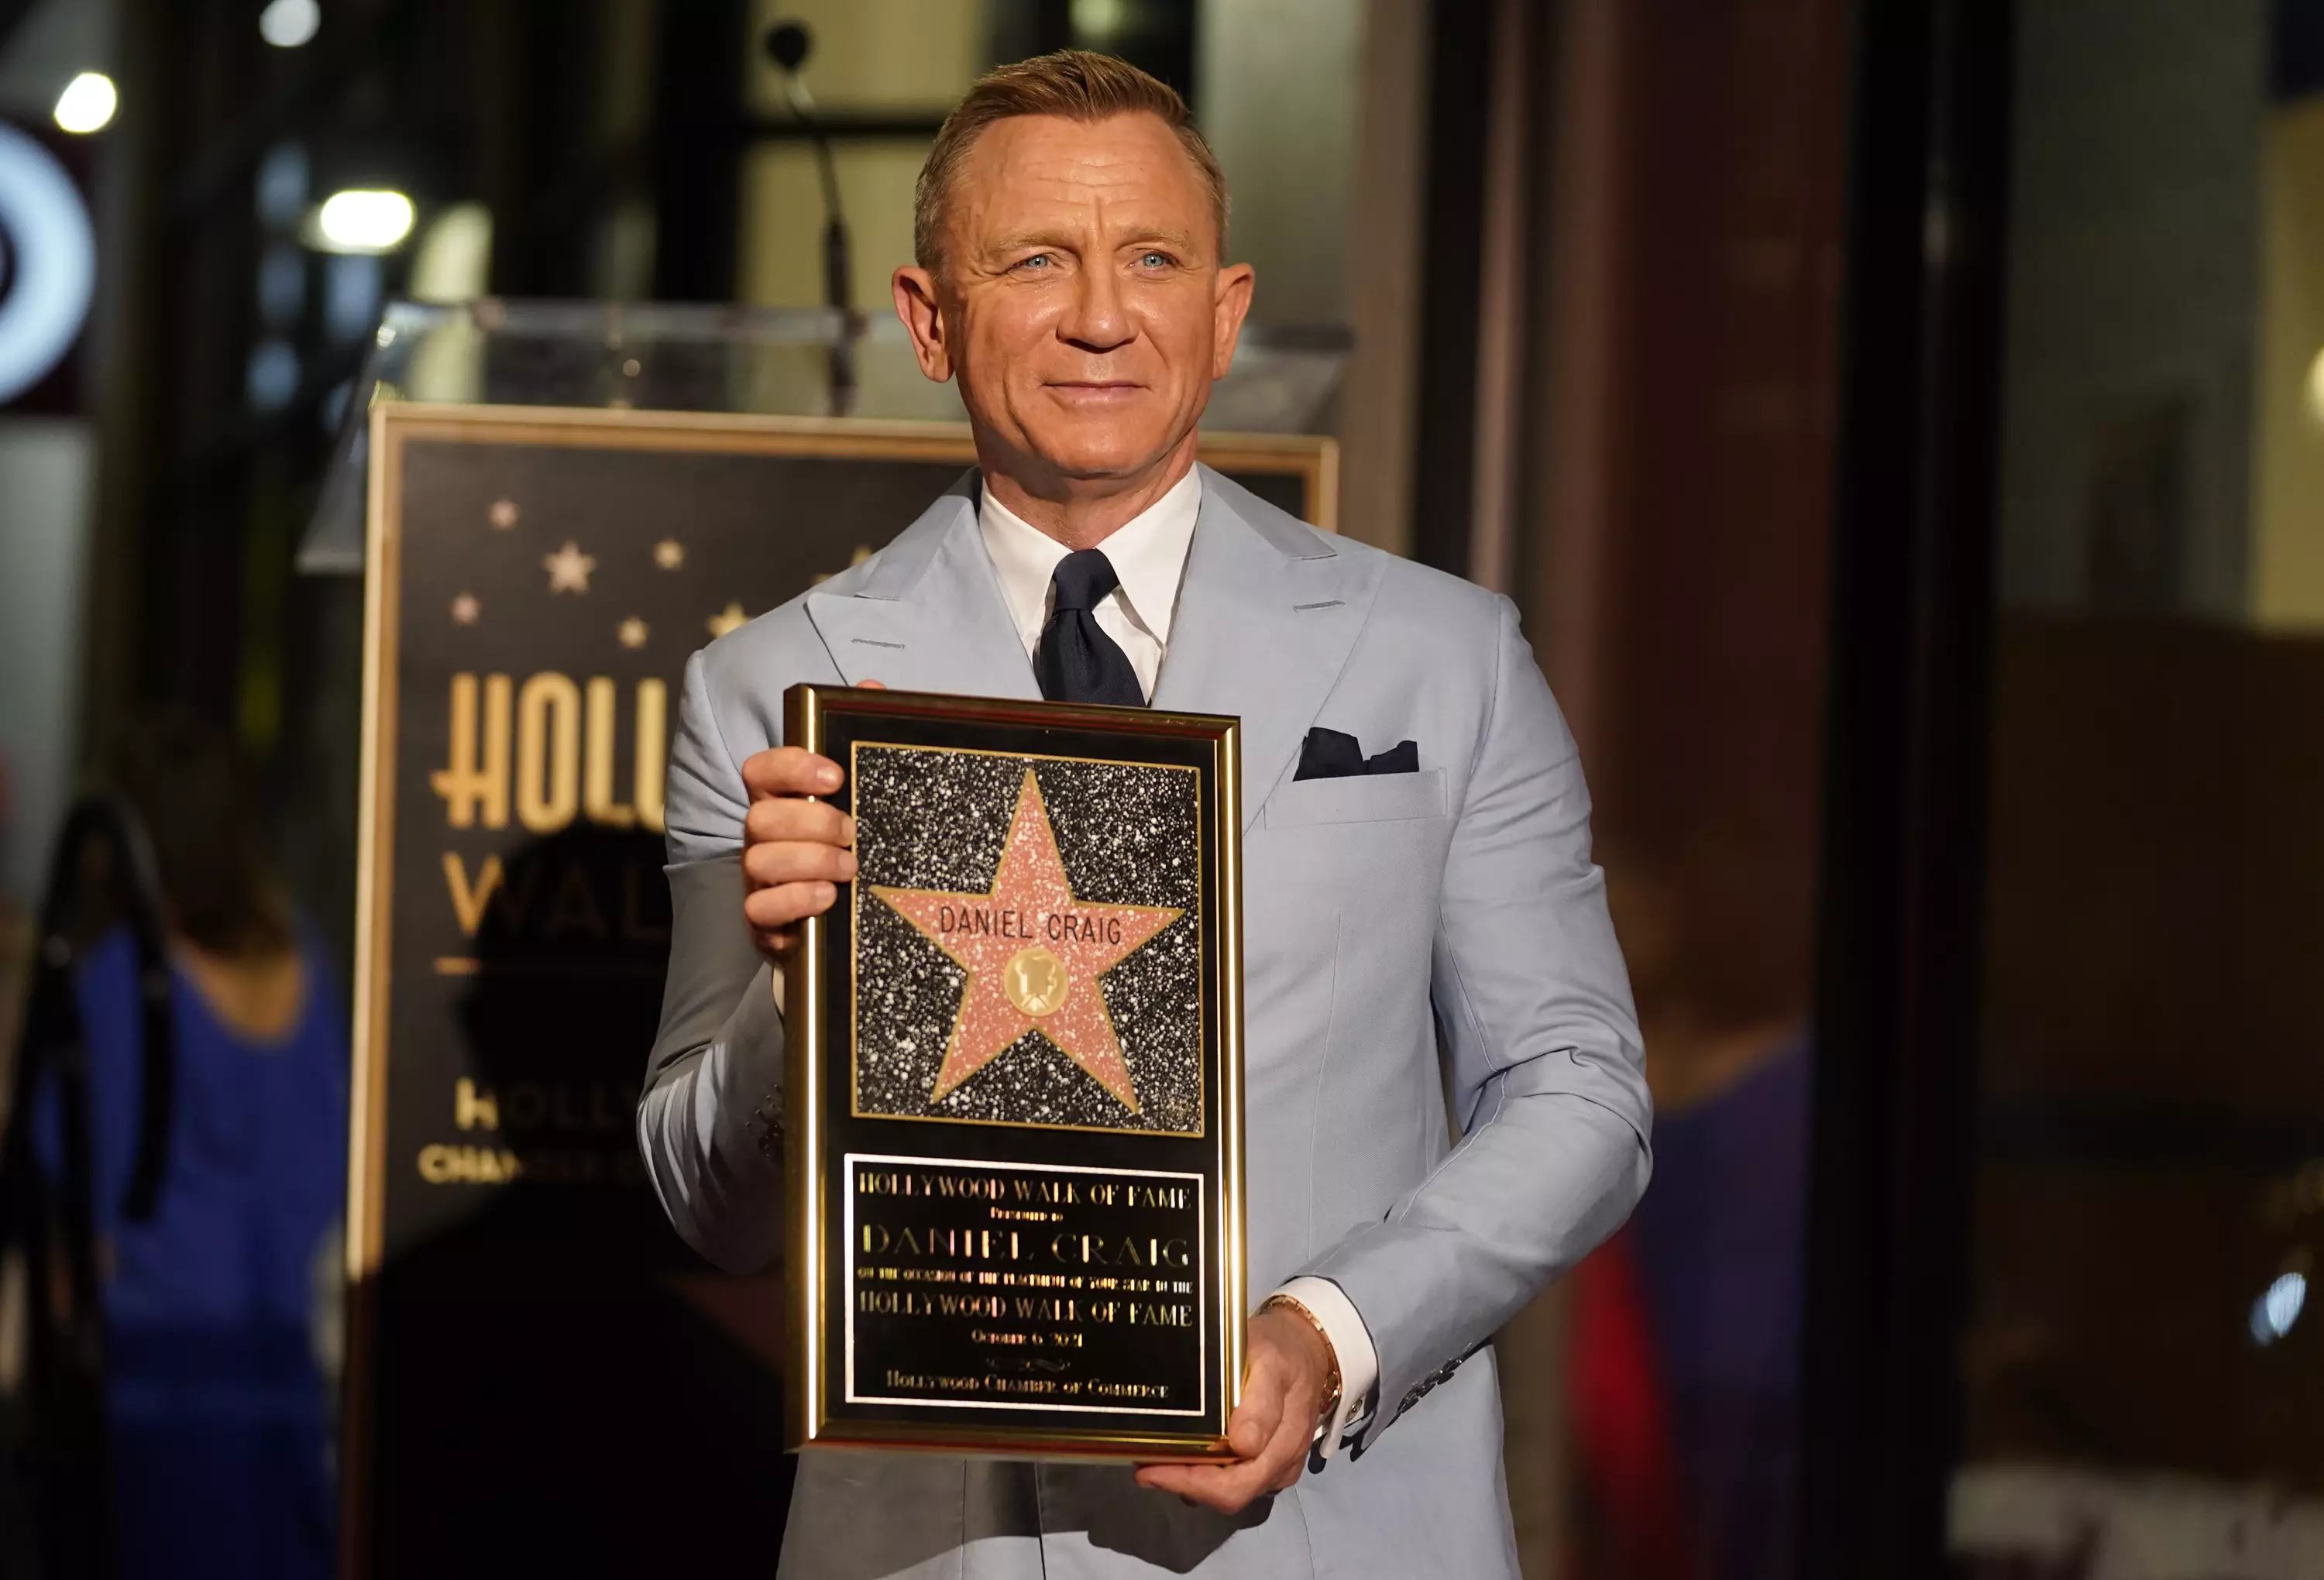 Daniel Craig was awarded a star on the Hollywood Walk of Fame following the release of his final Bond movie. (